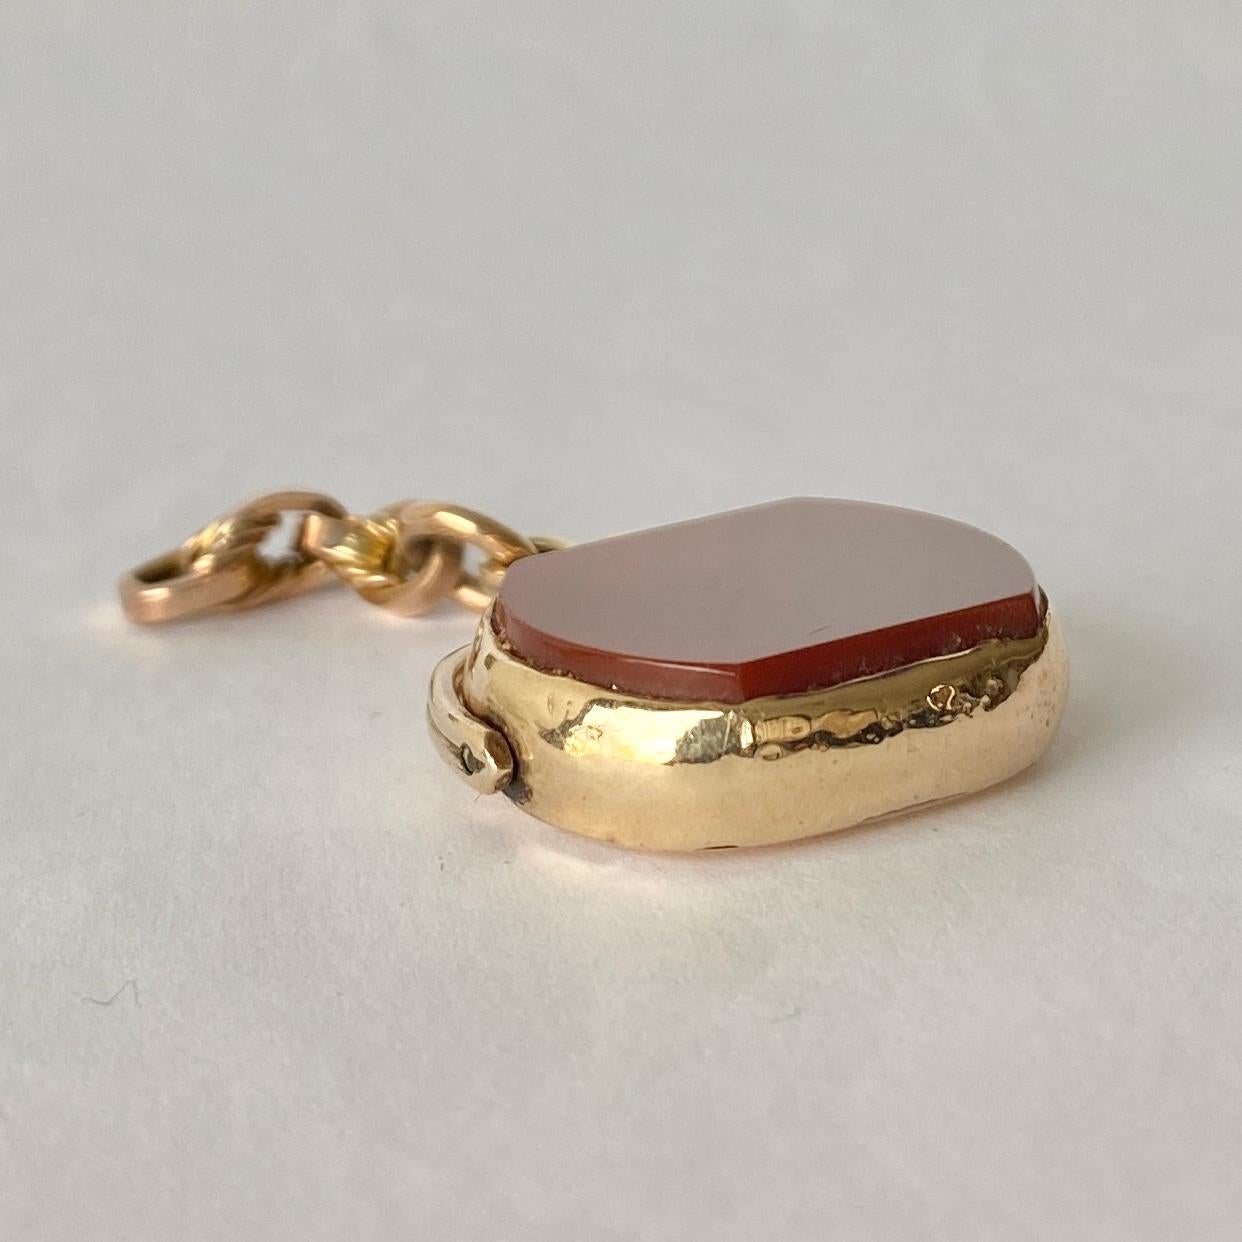 Cabochon Victorian Carnelian 9 Carat Gold Spinning Fob